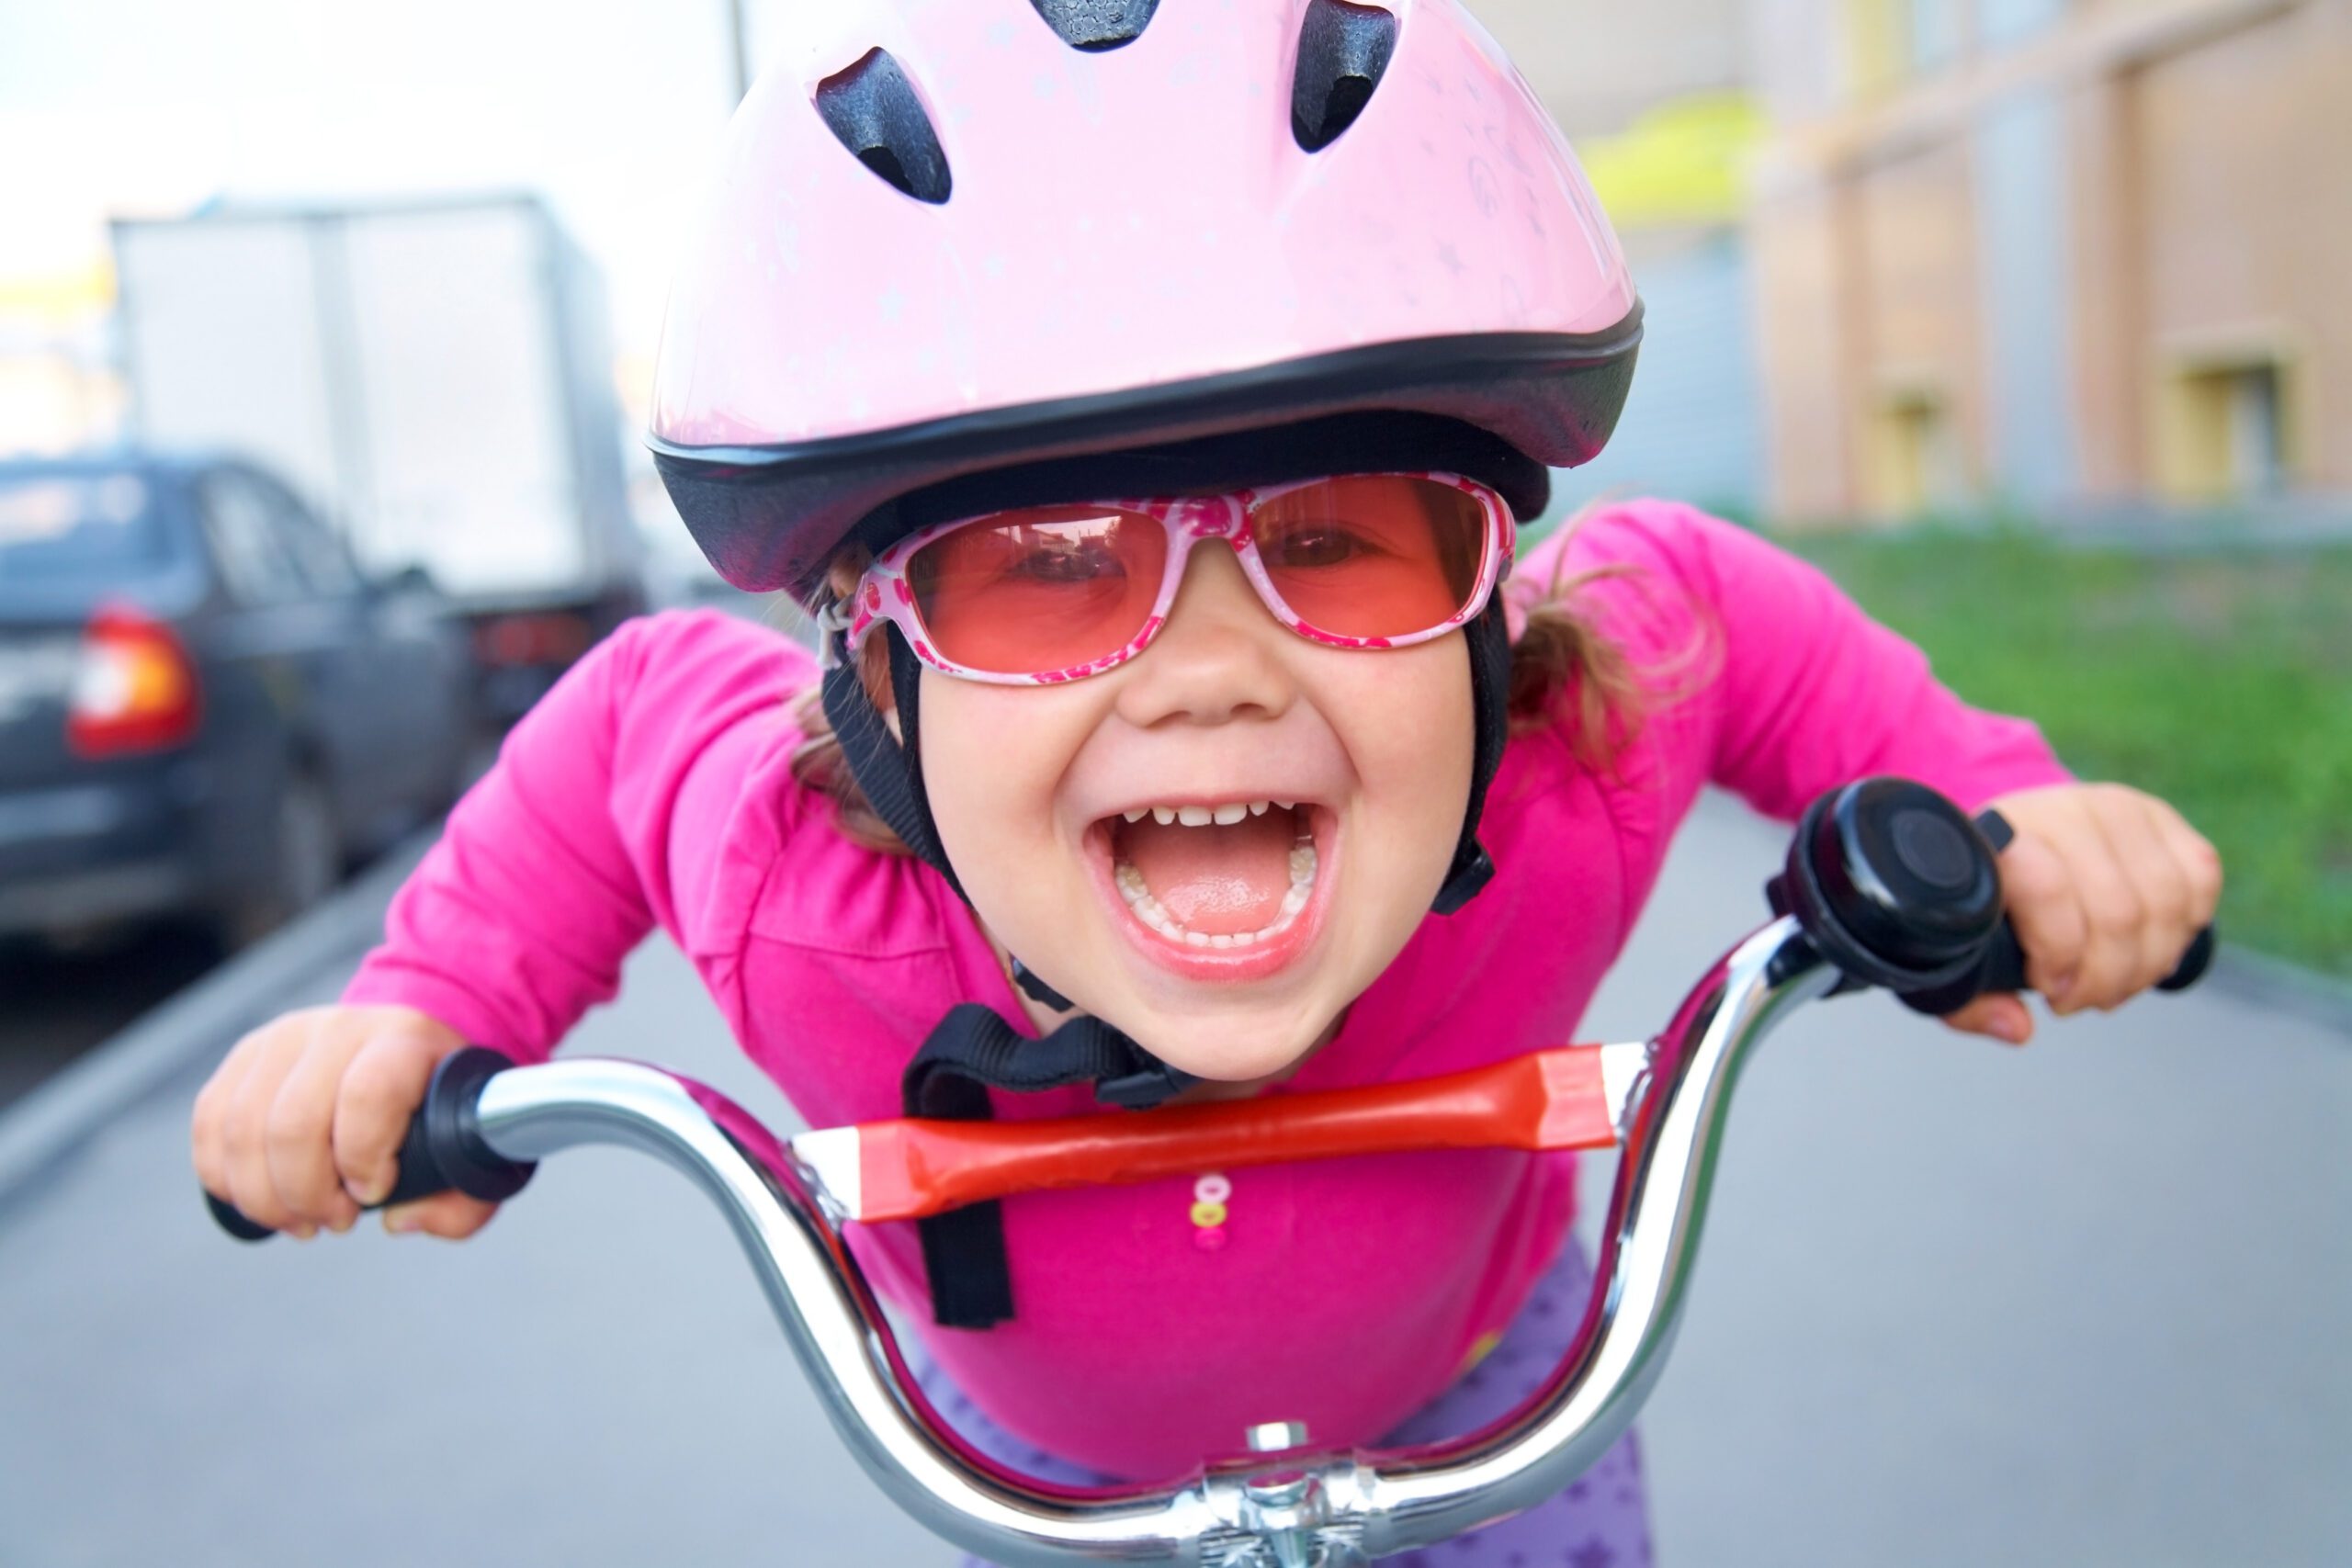 A young bike rider in pink sweater, glasses and helmet laughs at the camera.